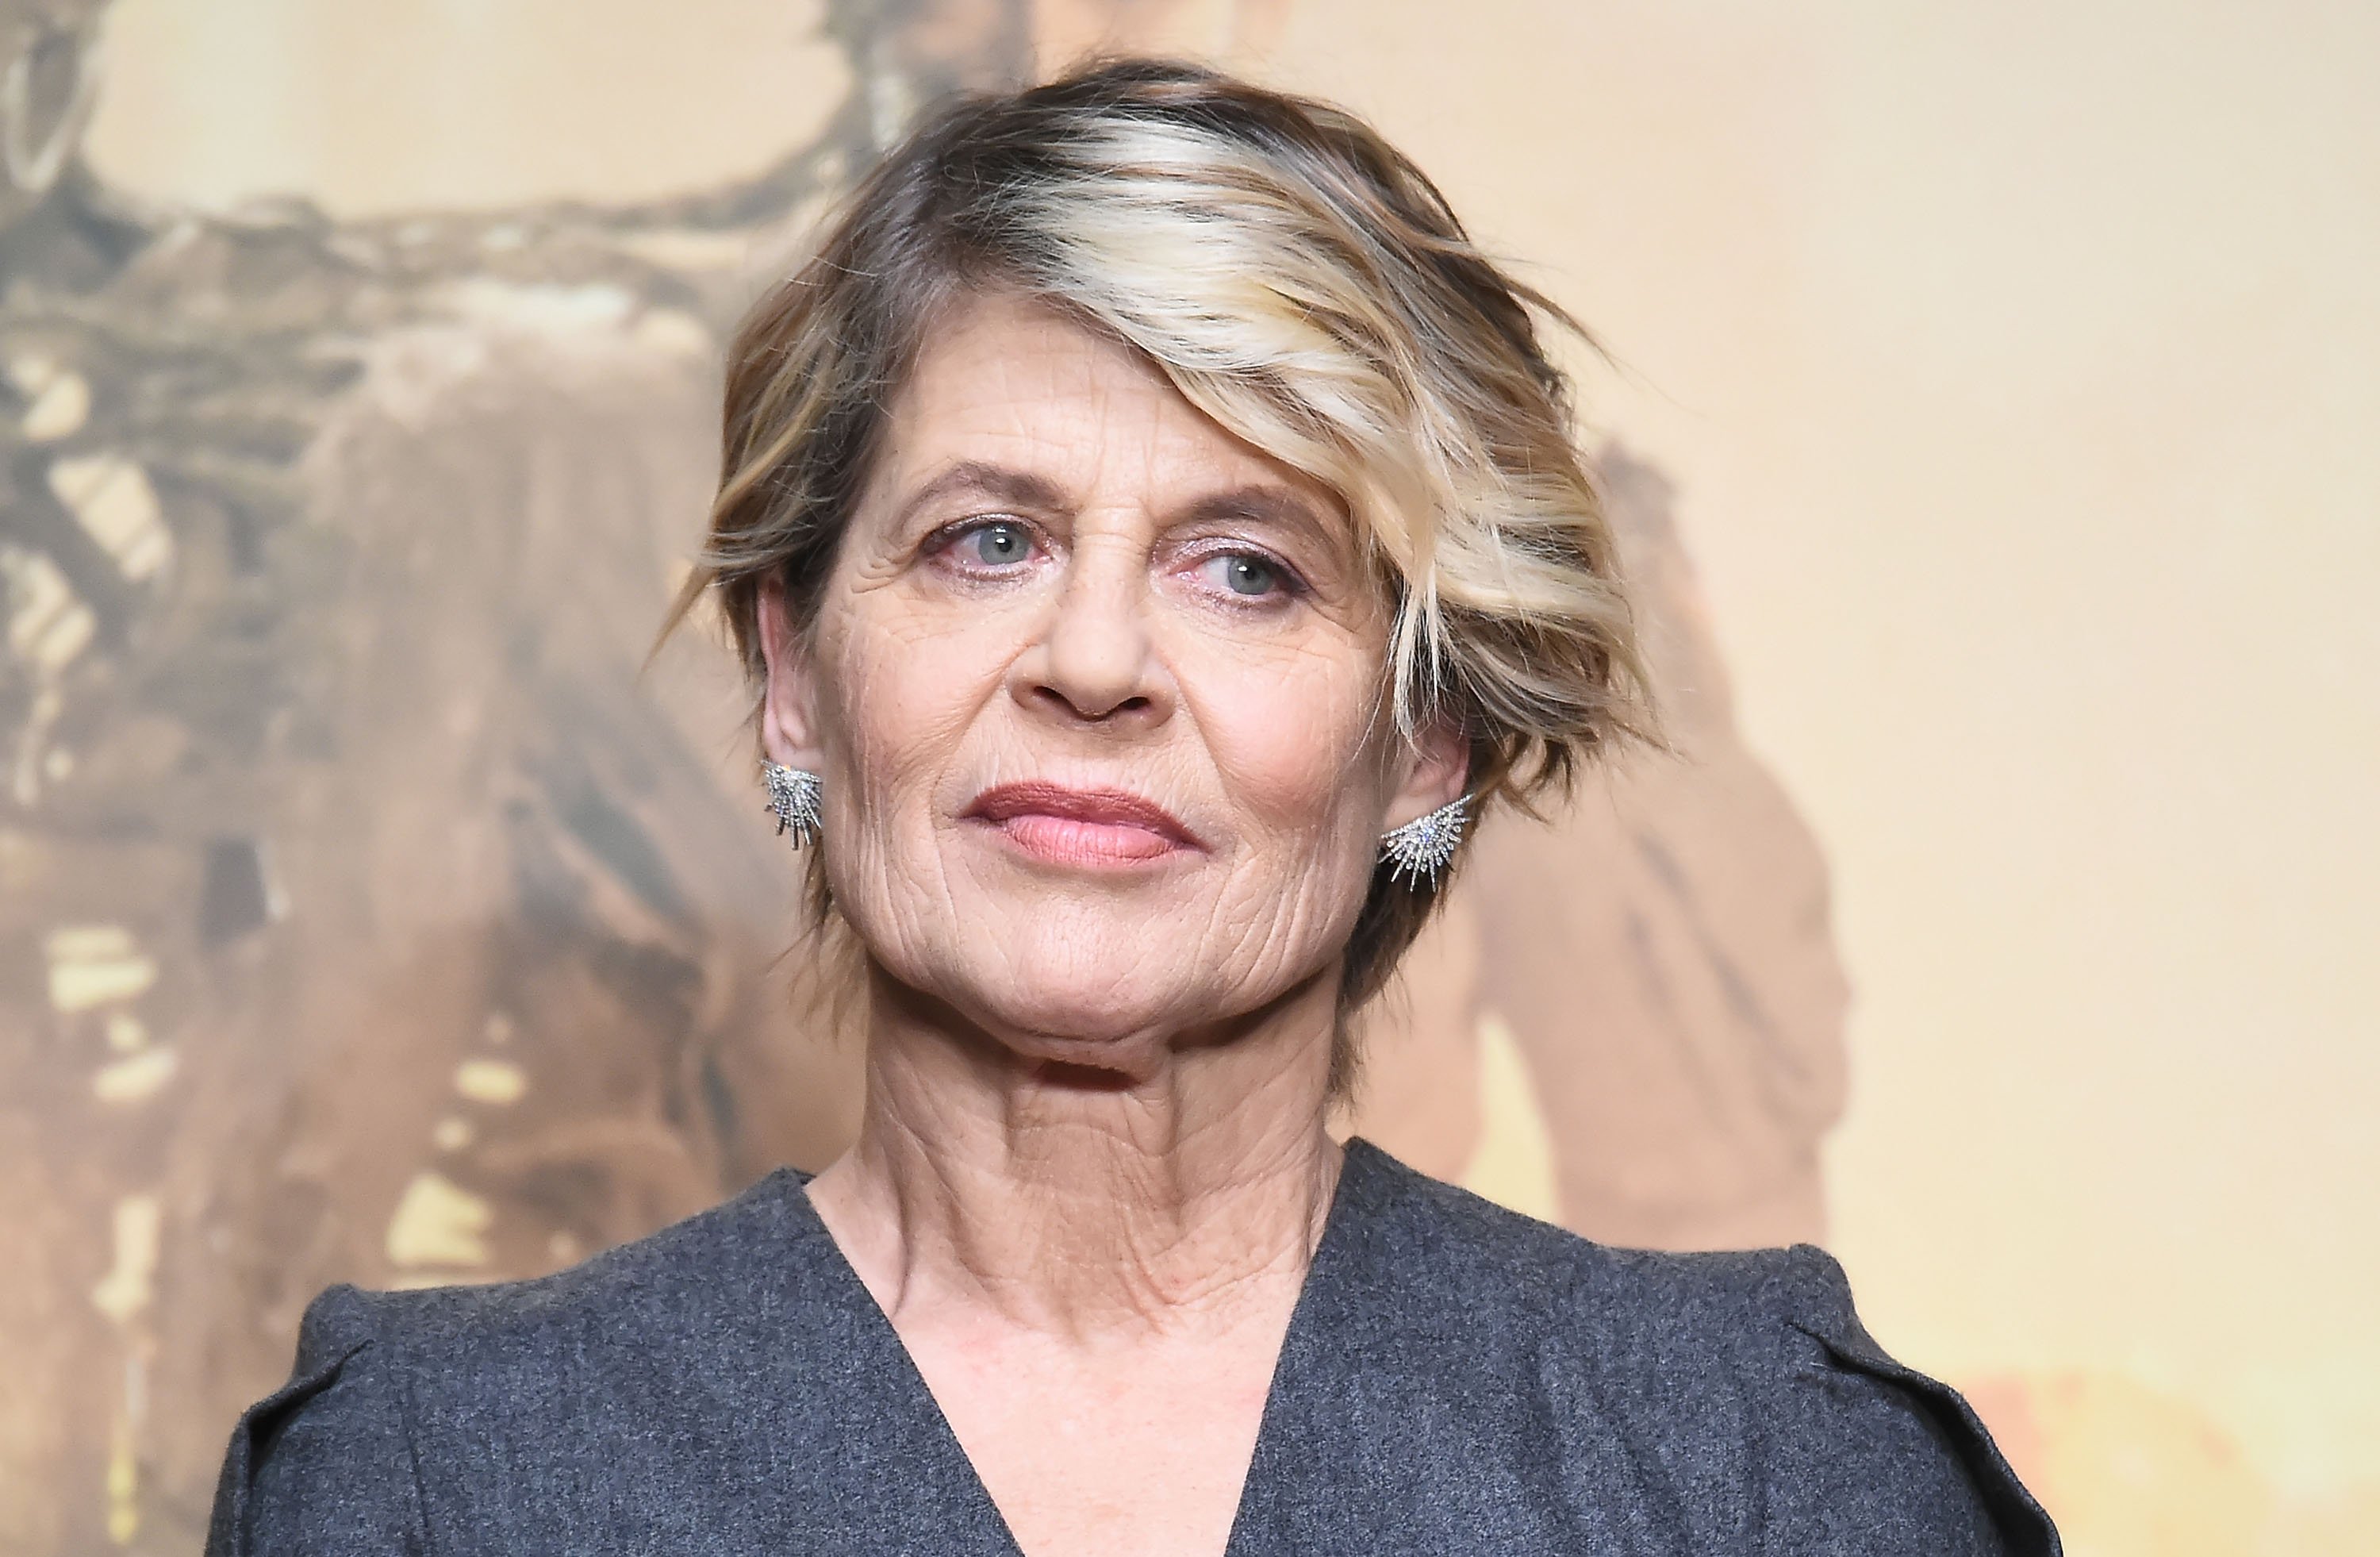 Linda Hamilton attends the press conference for the Japan premiere of 'Terminator: Dark Fate' on November 5, 2019, in Tokyo, Japan | Source: Getty Images